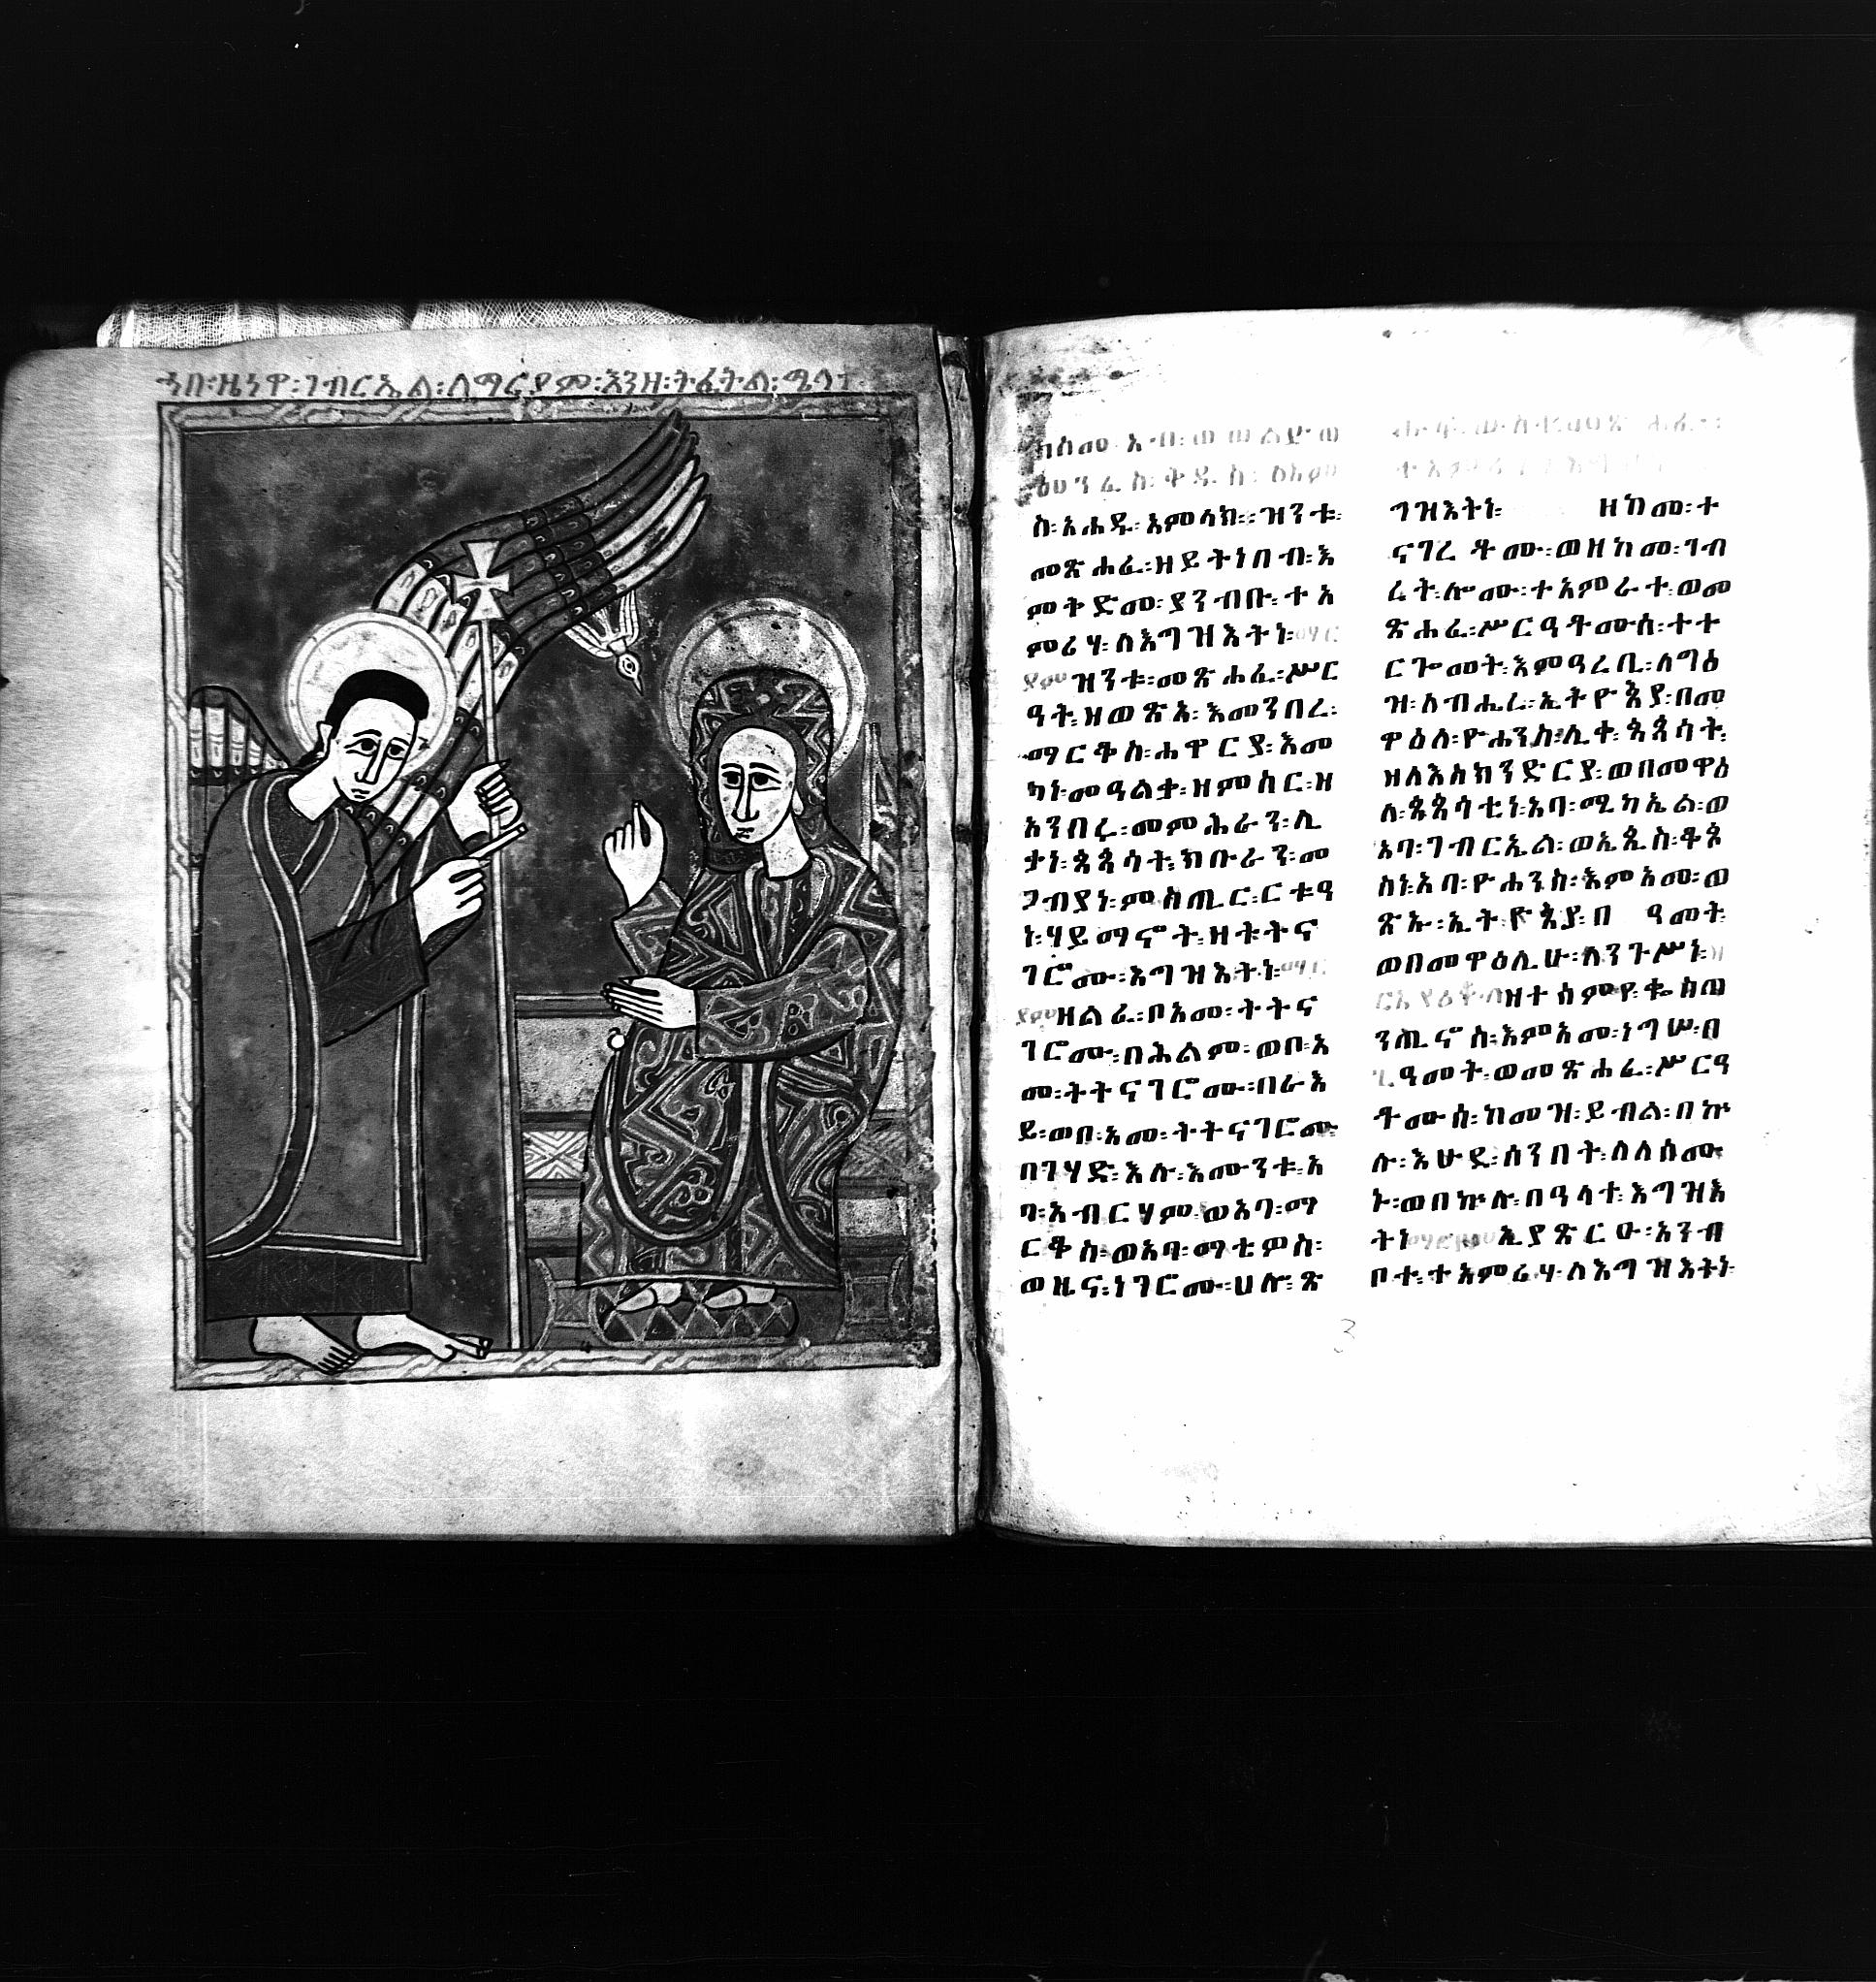 Ethiopian manuscript containing Miracles of Mary (<a href='https://w3id.org/vhmml/readingRoom/view/201729'>EMML 9002</a>)